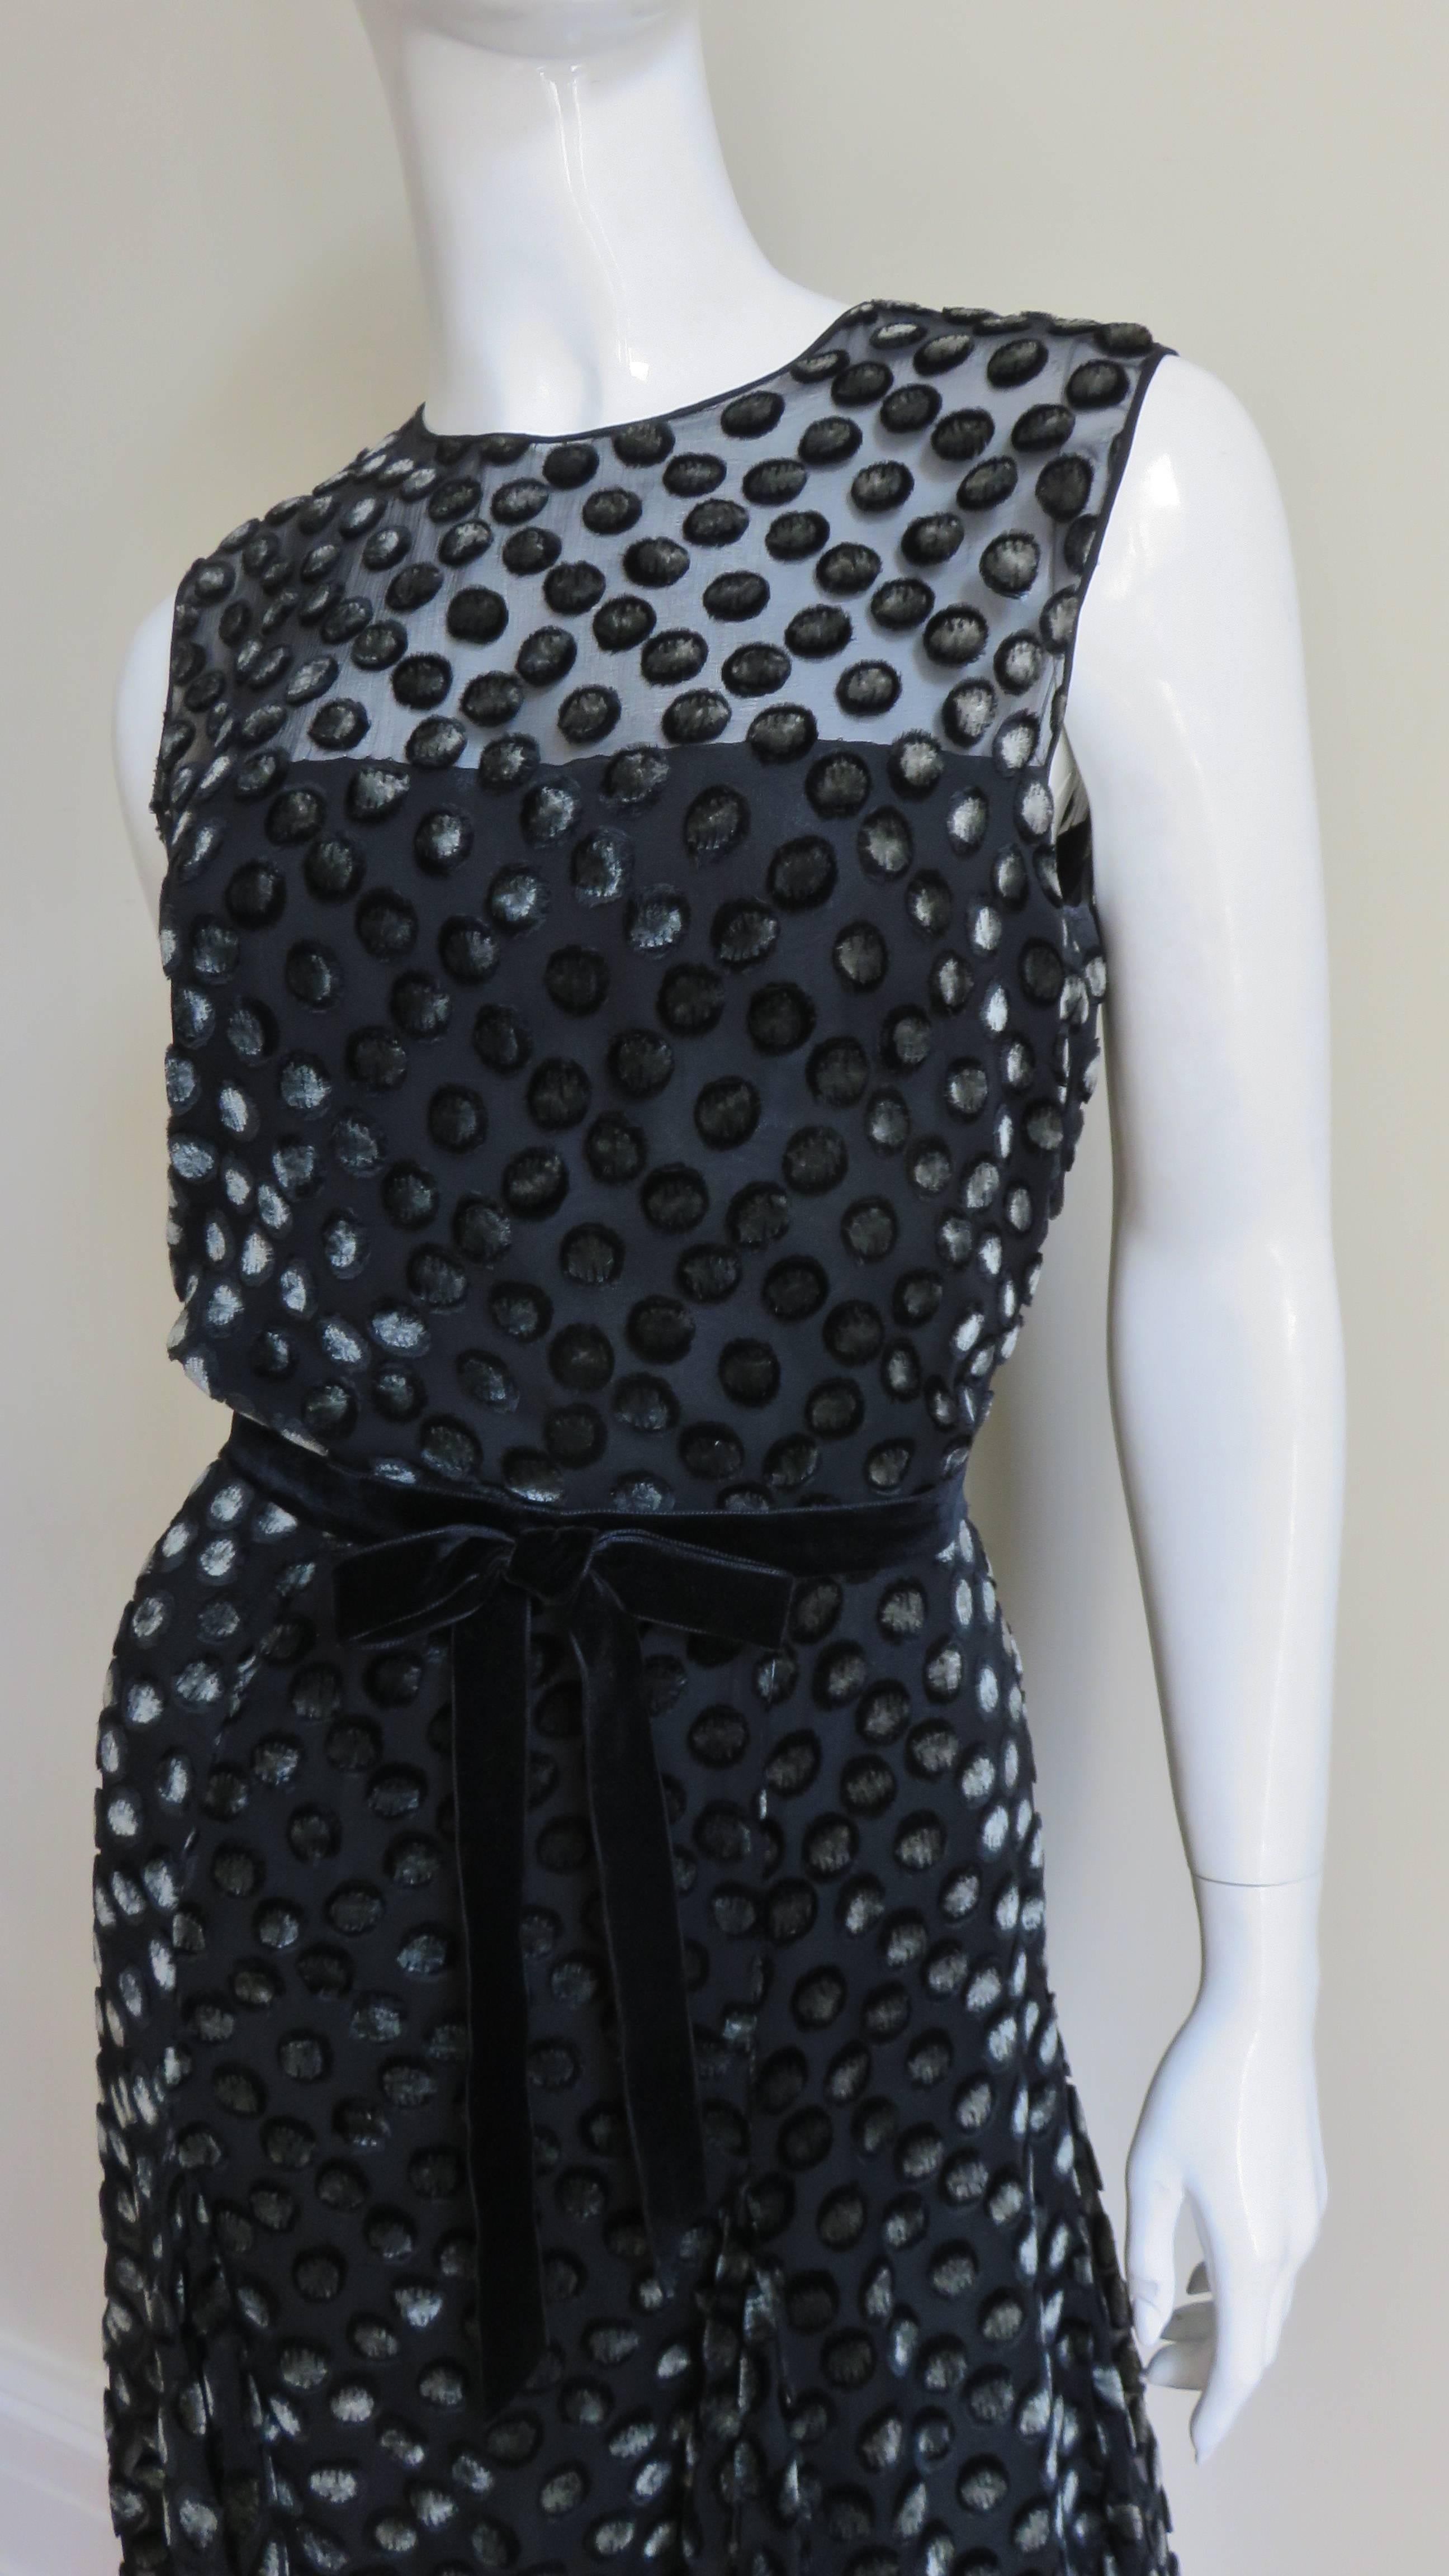 A beautiful black semi sheer silk dress by Bill Blass covered with black velvet dots with grey centers. It is sleeveless with a crew neckline, a blouson bodice with a black velvet belt at the waist and a full skirt.  The dress has a silk lining